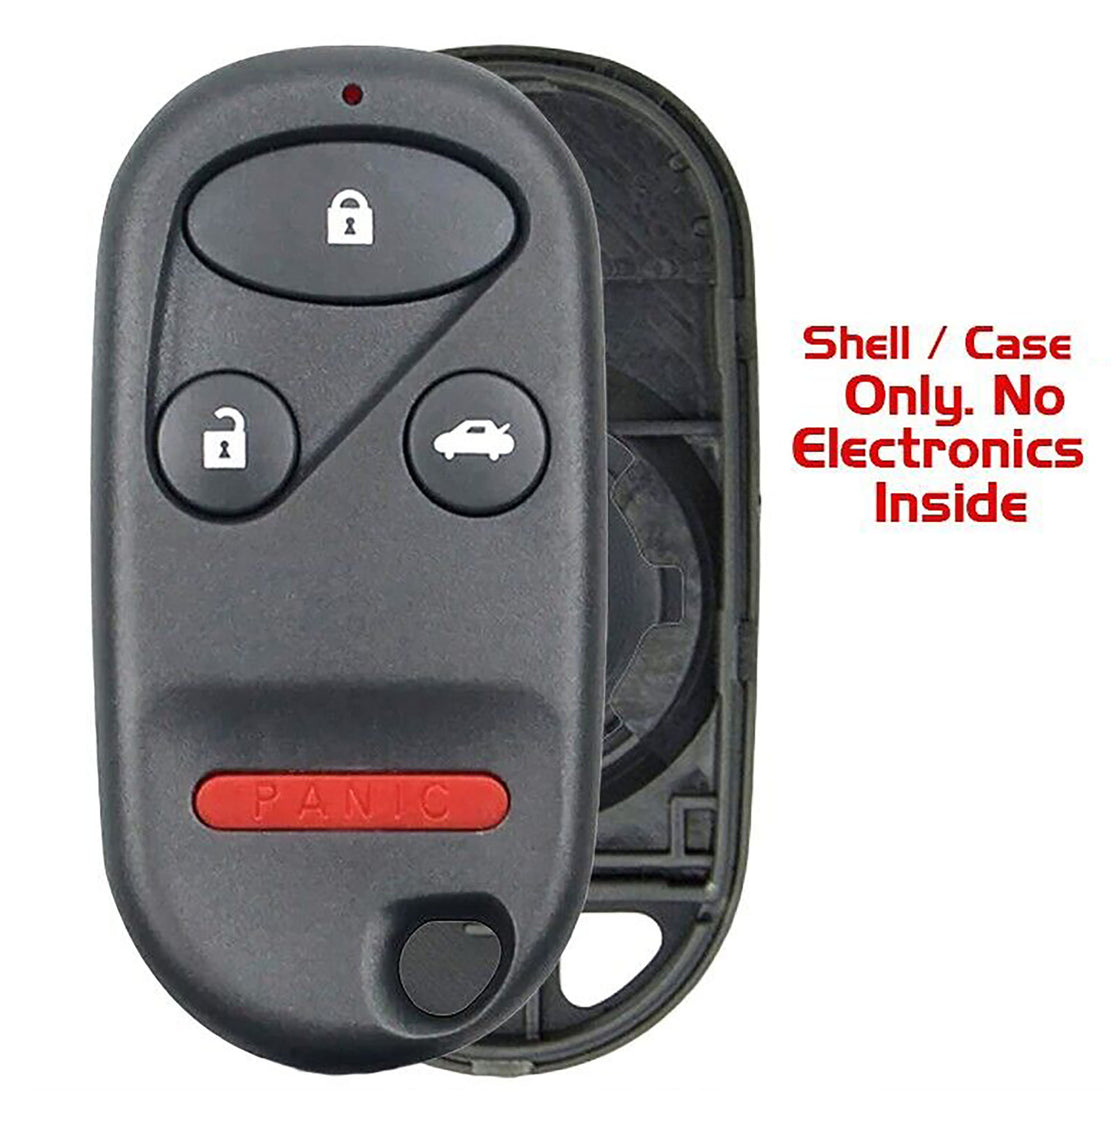 1x New Replacement Key Fob Remote SHELL / CASE Compatible with & Fit For Honda Acura Vehicles - MPN A269ZUA108-04 (NO electronics or Chip inside)